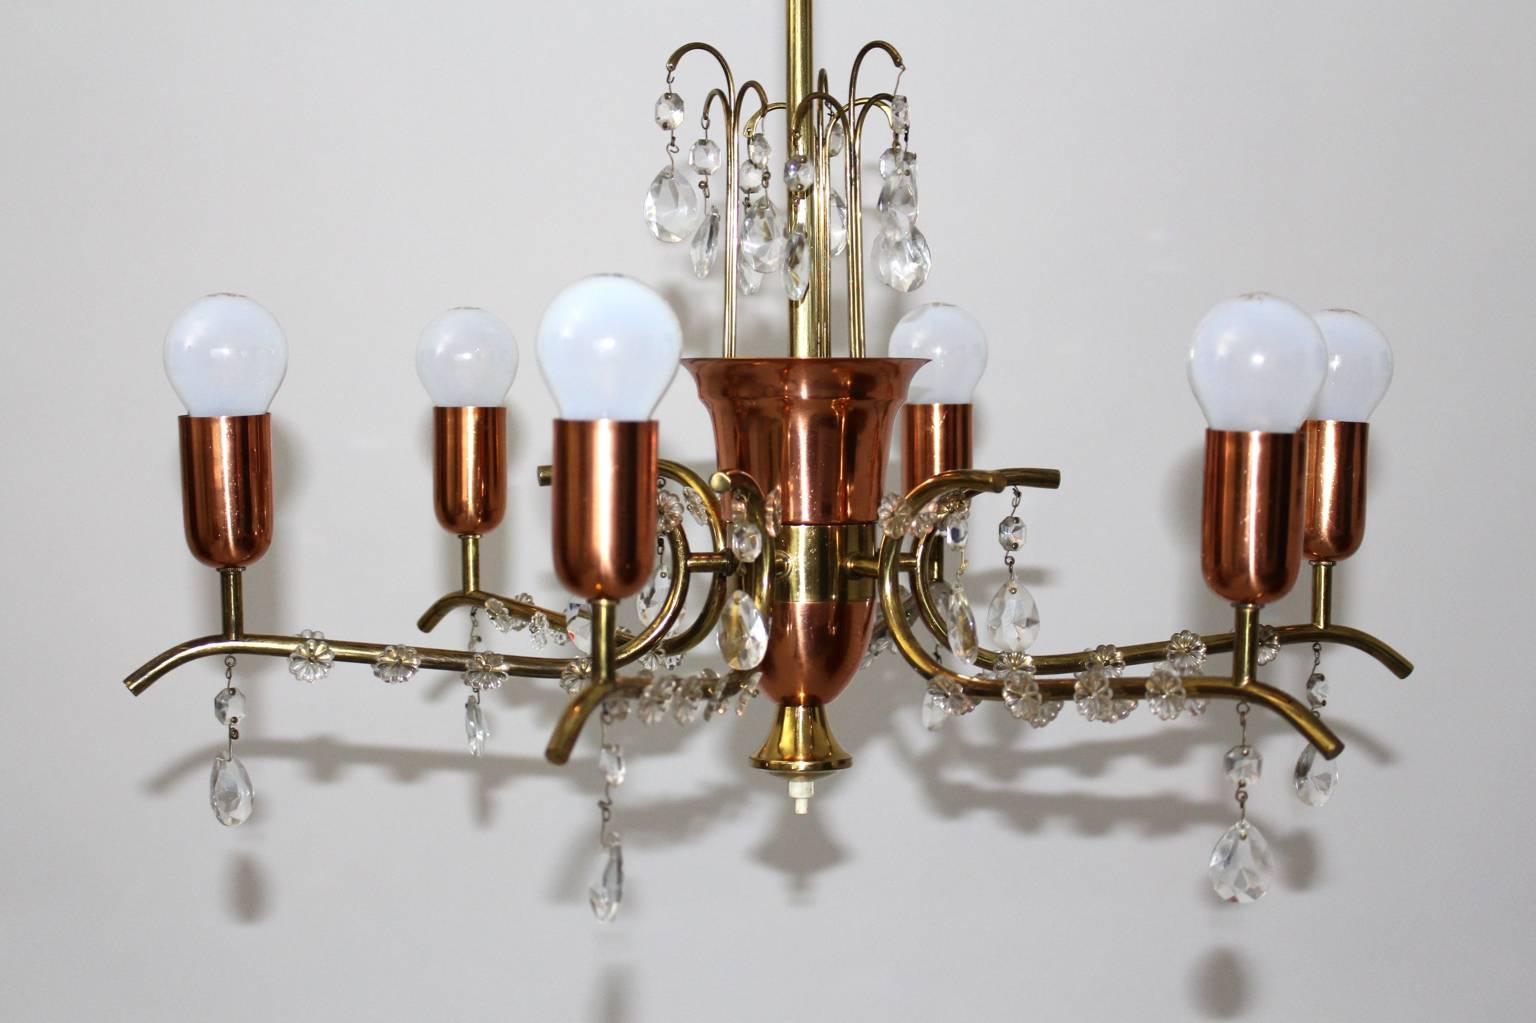 Mid Century Modern brass copper crystal chandelier by Rupert Nikoll Vienna 1950s.
The chandelier is made of brass, copper and crystal glass elements.
A beautiful link from the traditional chandeliers to the whimsical era of the 1950s.
Six sockets